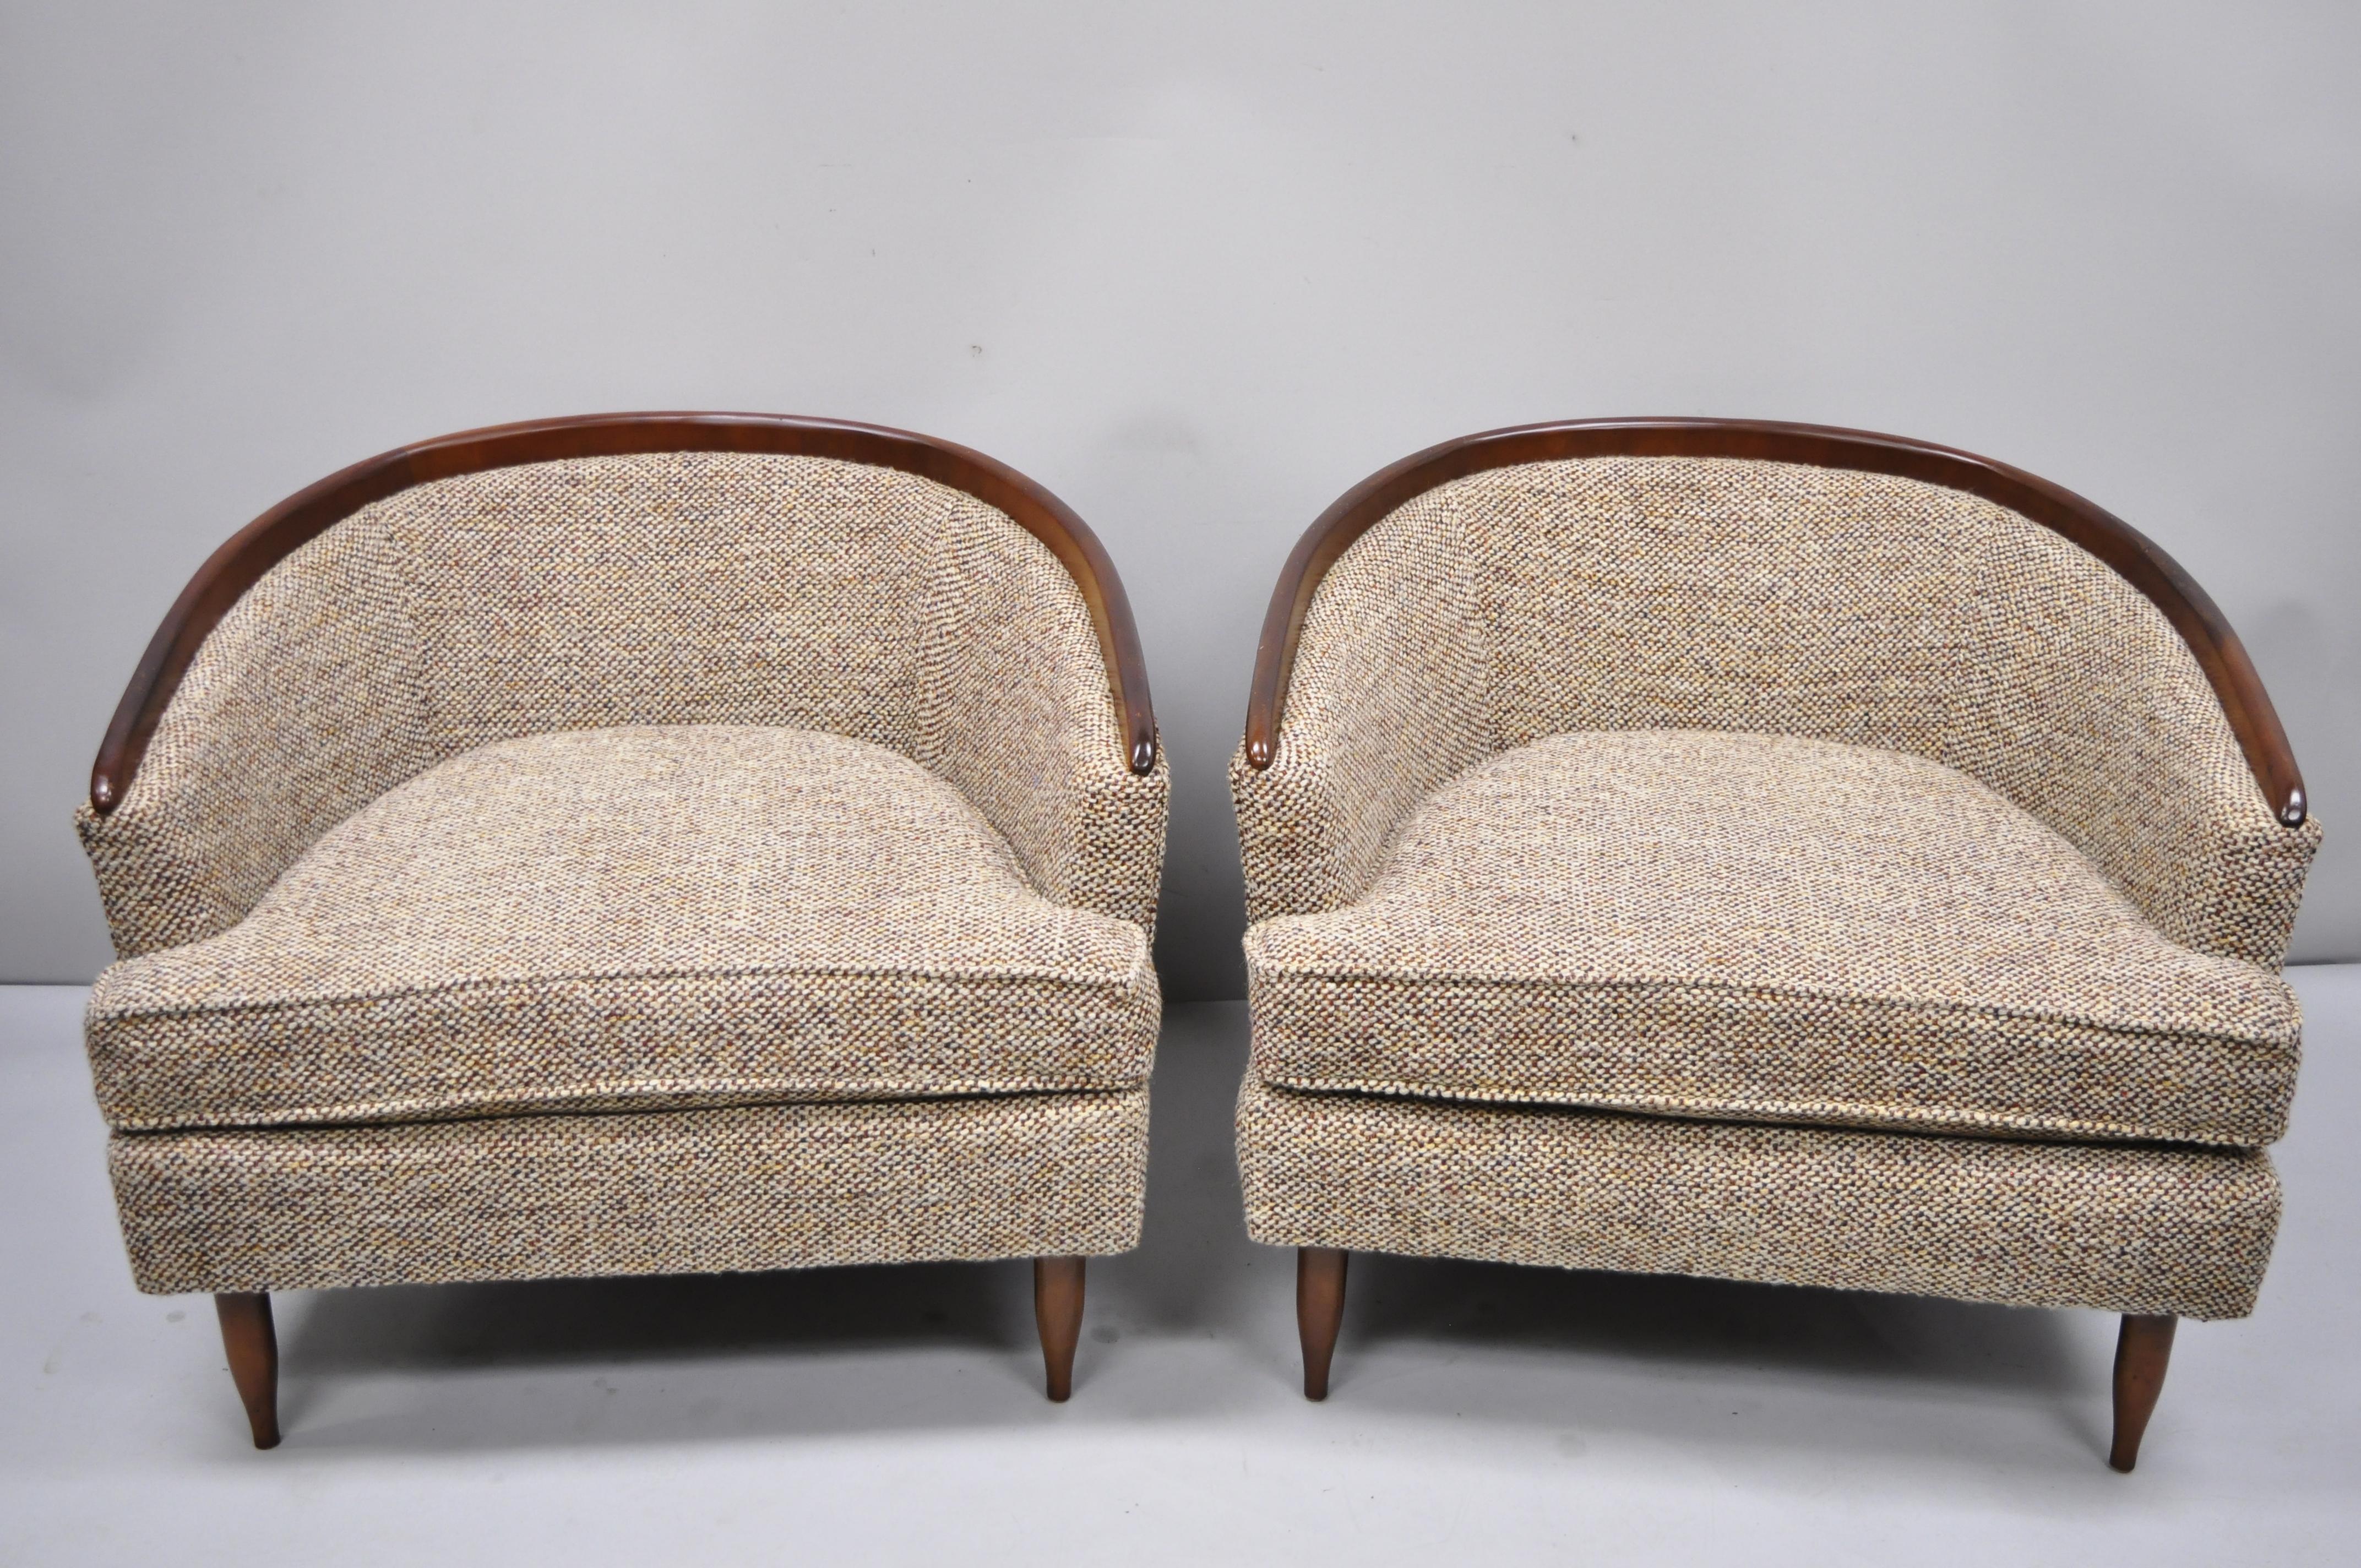 Pair of vintage wide barrel back walnut Mid-Century Modern club lounge chairs after Milo Baughman. Item features wide substantial form, wood trim to backs, wooden tapered legs, 